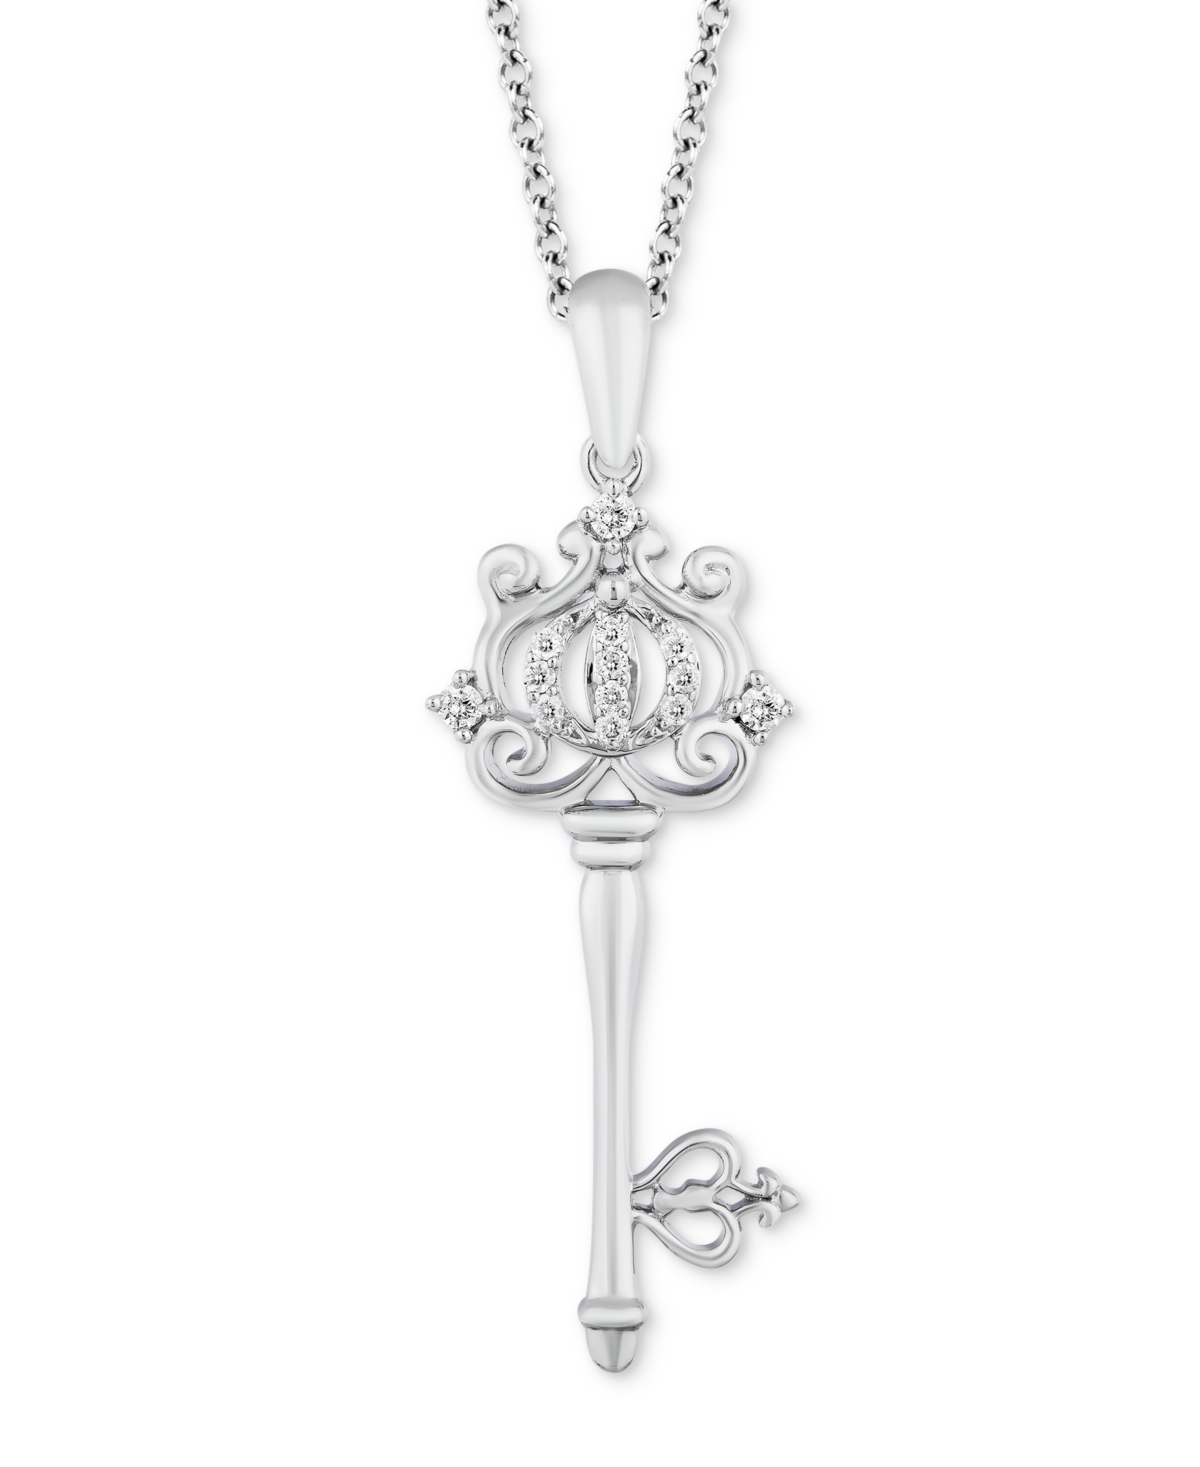 Enchanted Disney Fine Jewelry Diamond Cinderella Carriage Key Pendant Necklace (1/10 Ct. T.w.) In Sterling Silver, 16" + 2" Extend